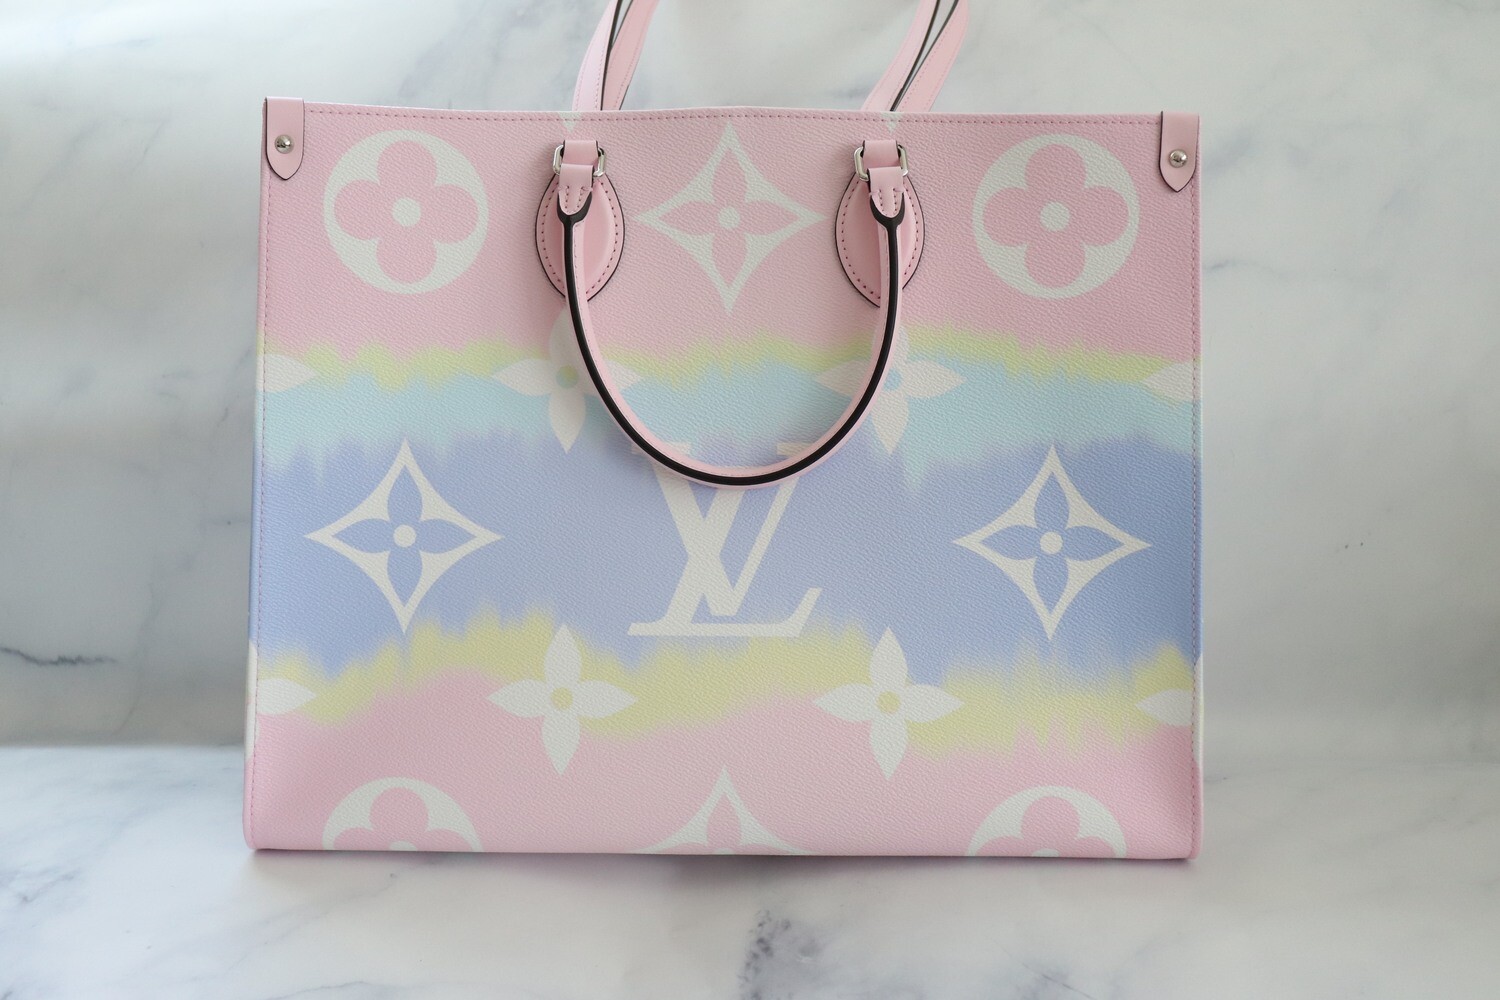 Louis Vuitton Escale On the Go Pastel, New in Dustbag